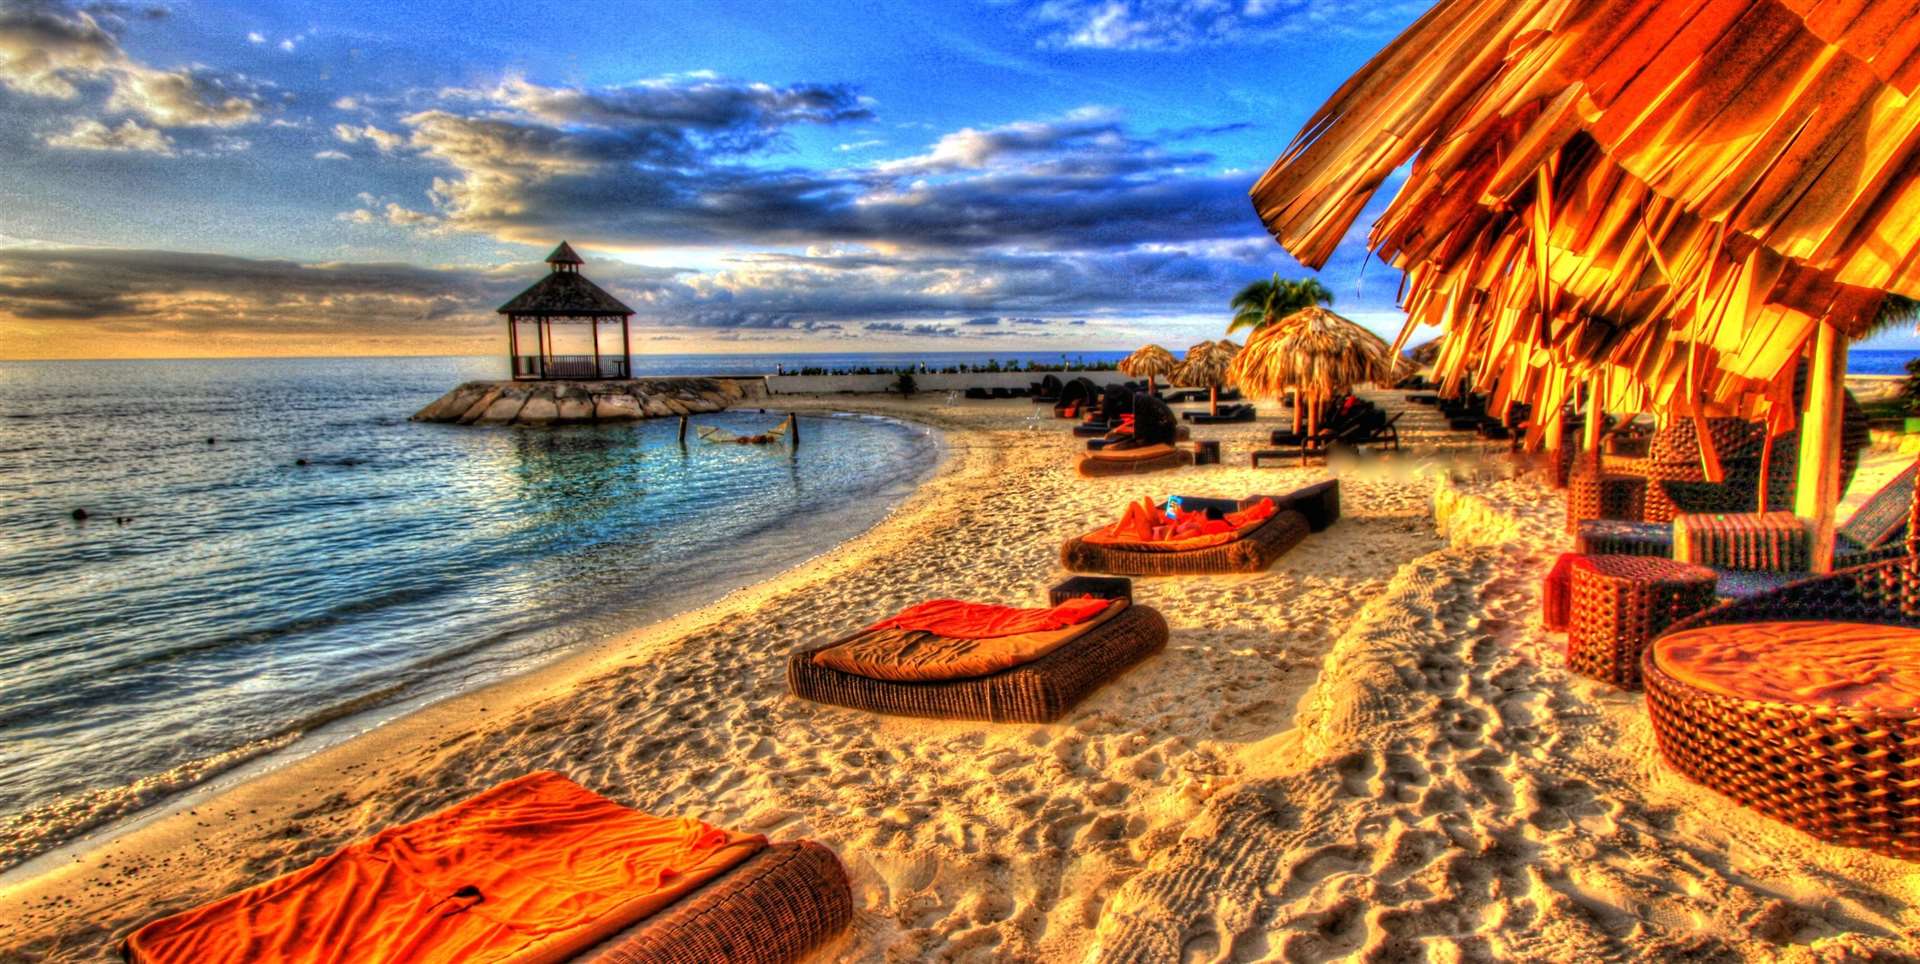 Experience the casual island vibe at Montego Bay in Jamaica.